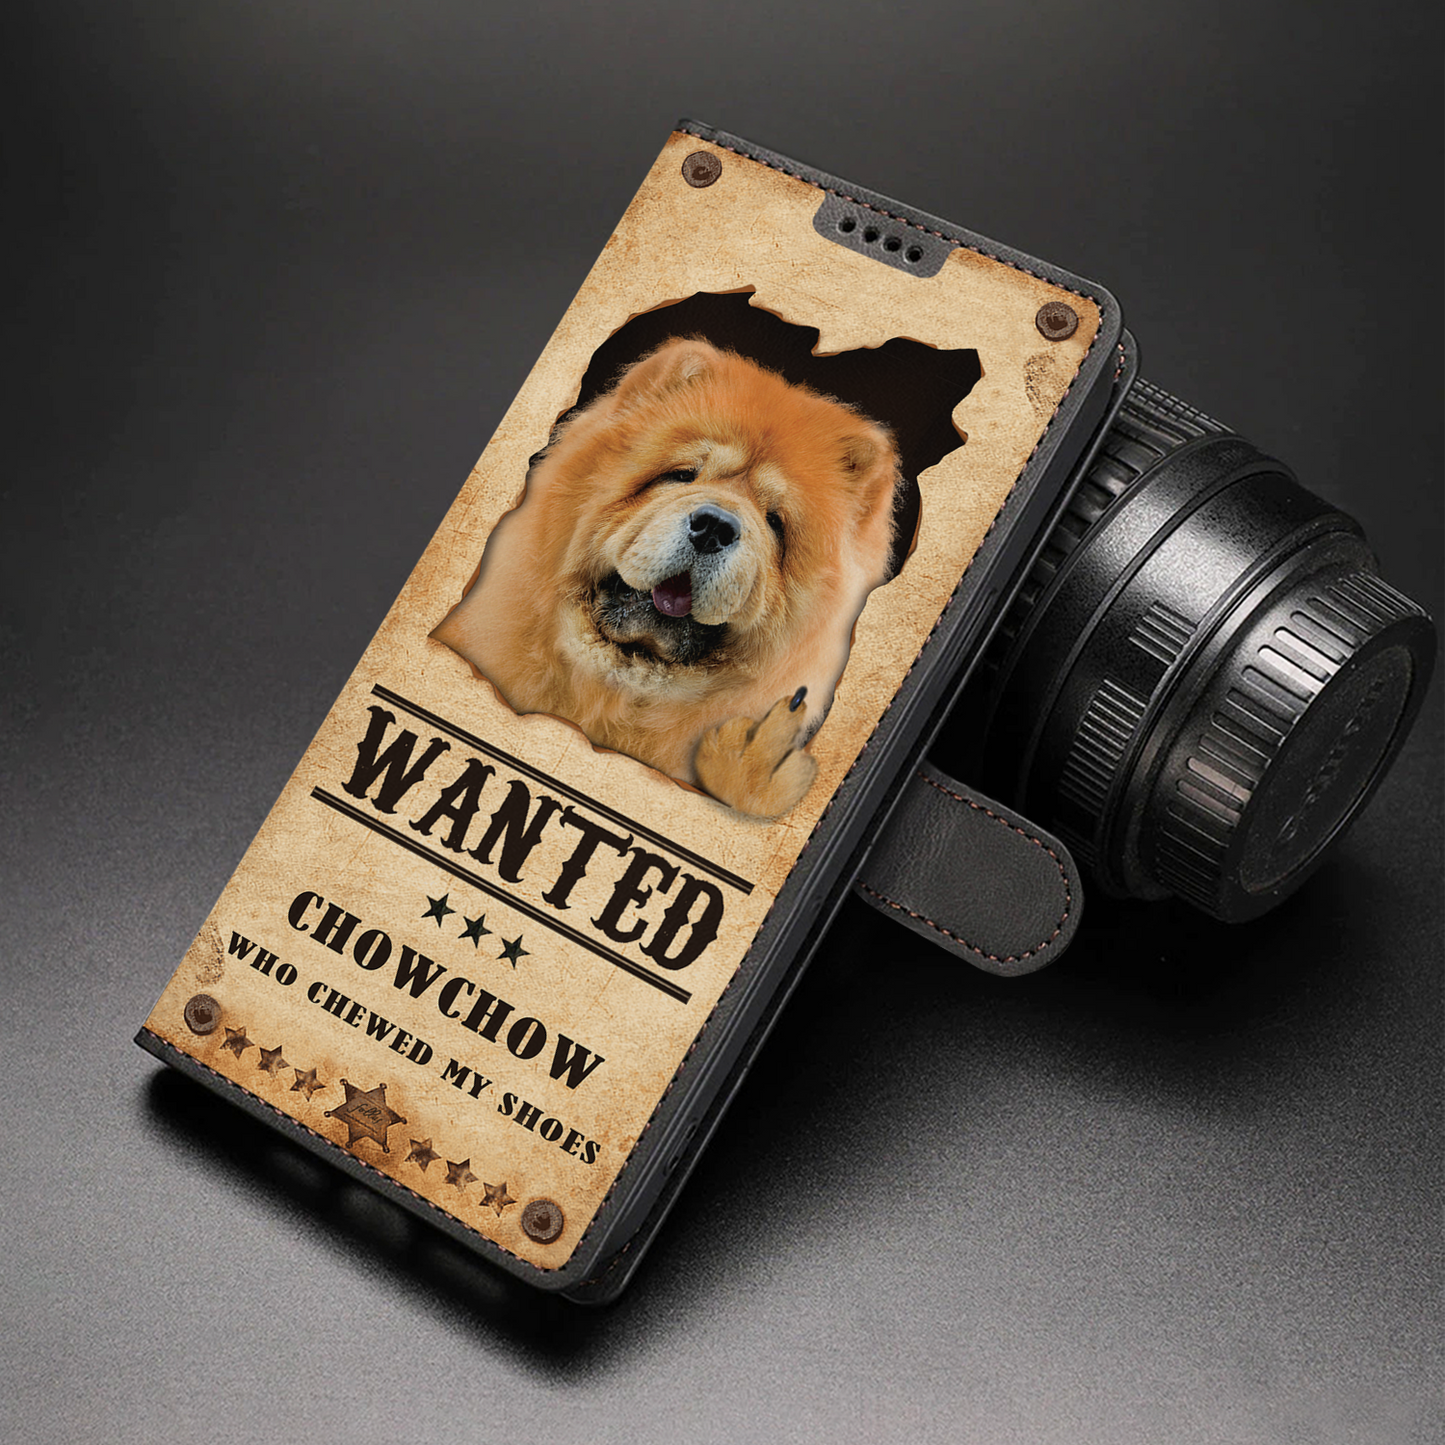 Chow Chow Wanted - Fun Wallet Phone Case V1